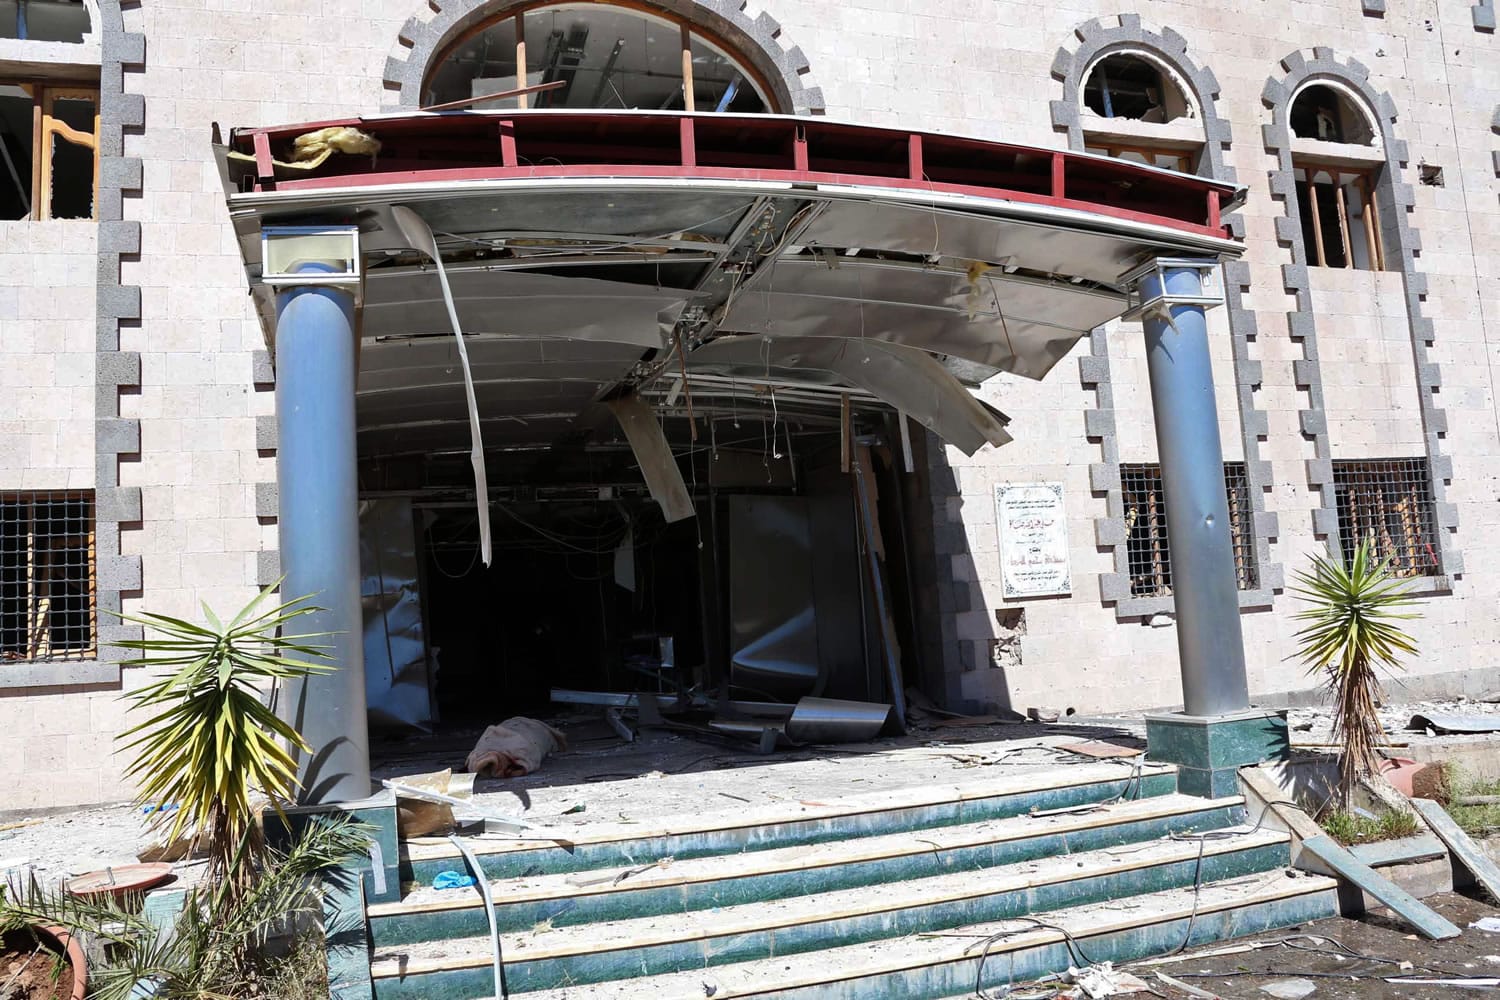 Heavy damage after an explosion at the Defense Ministry complex in Sanaa, Yemen, on Thursday.